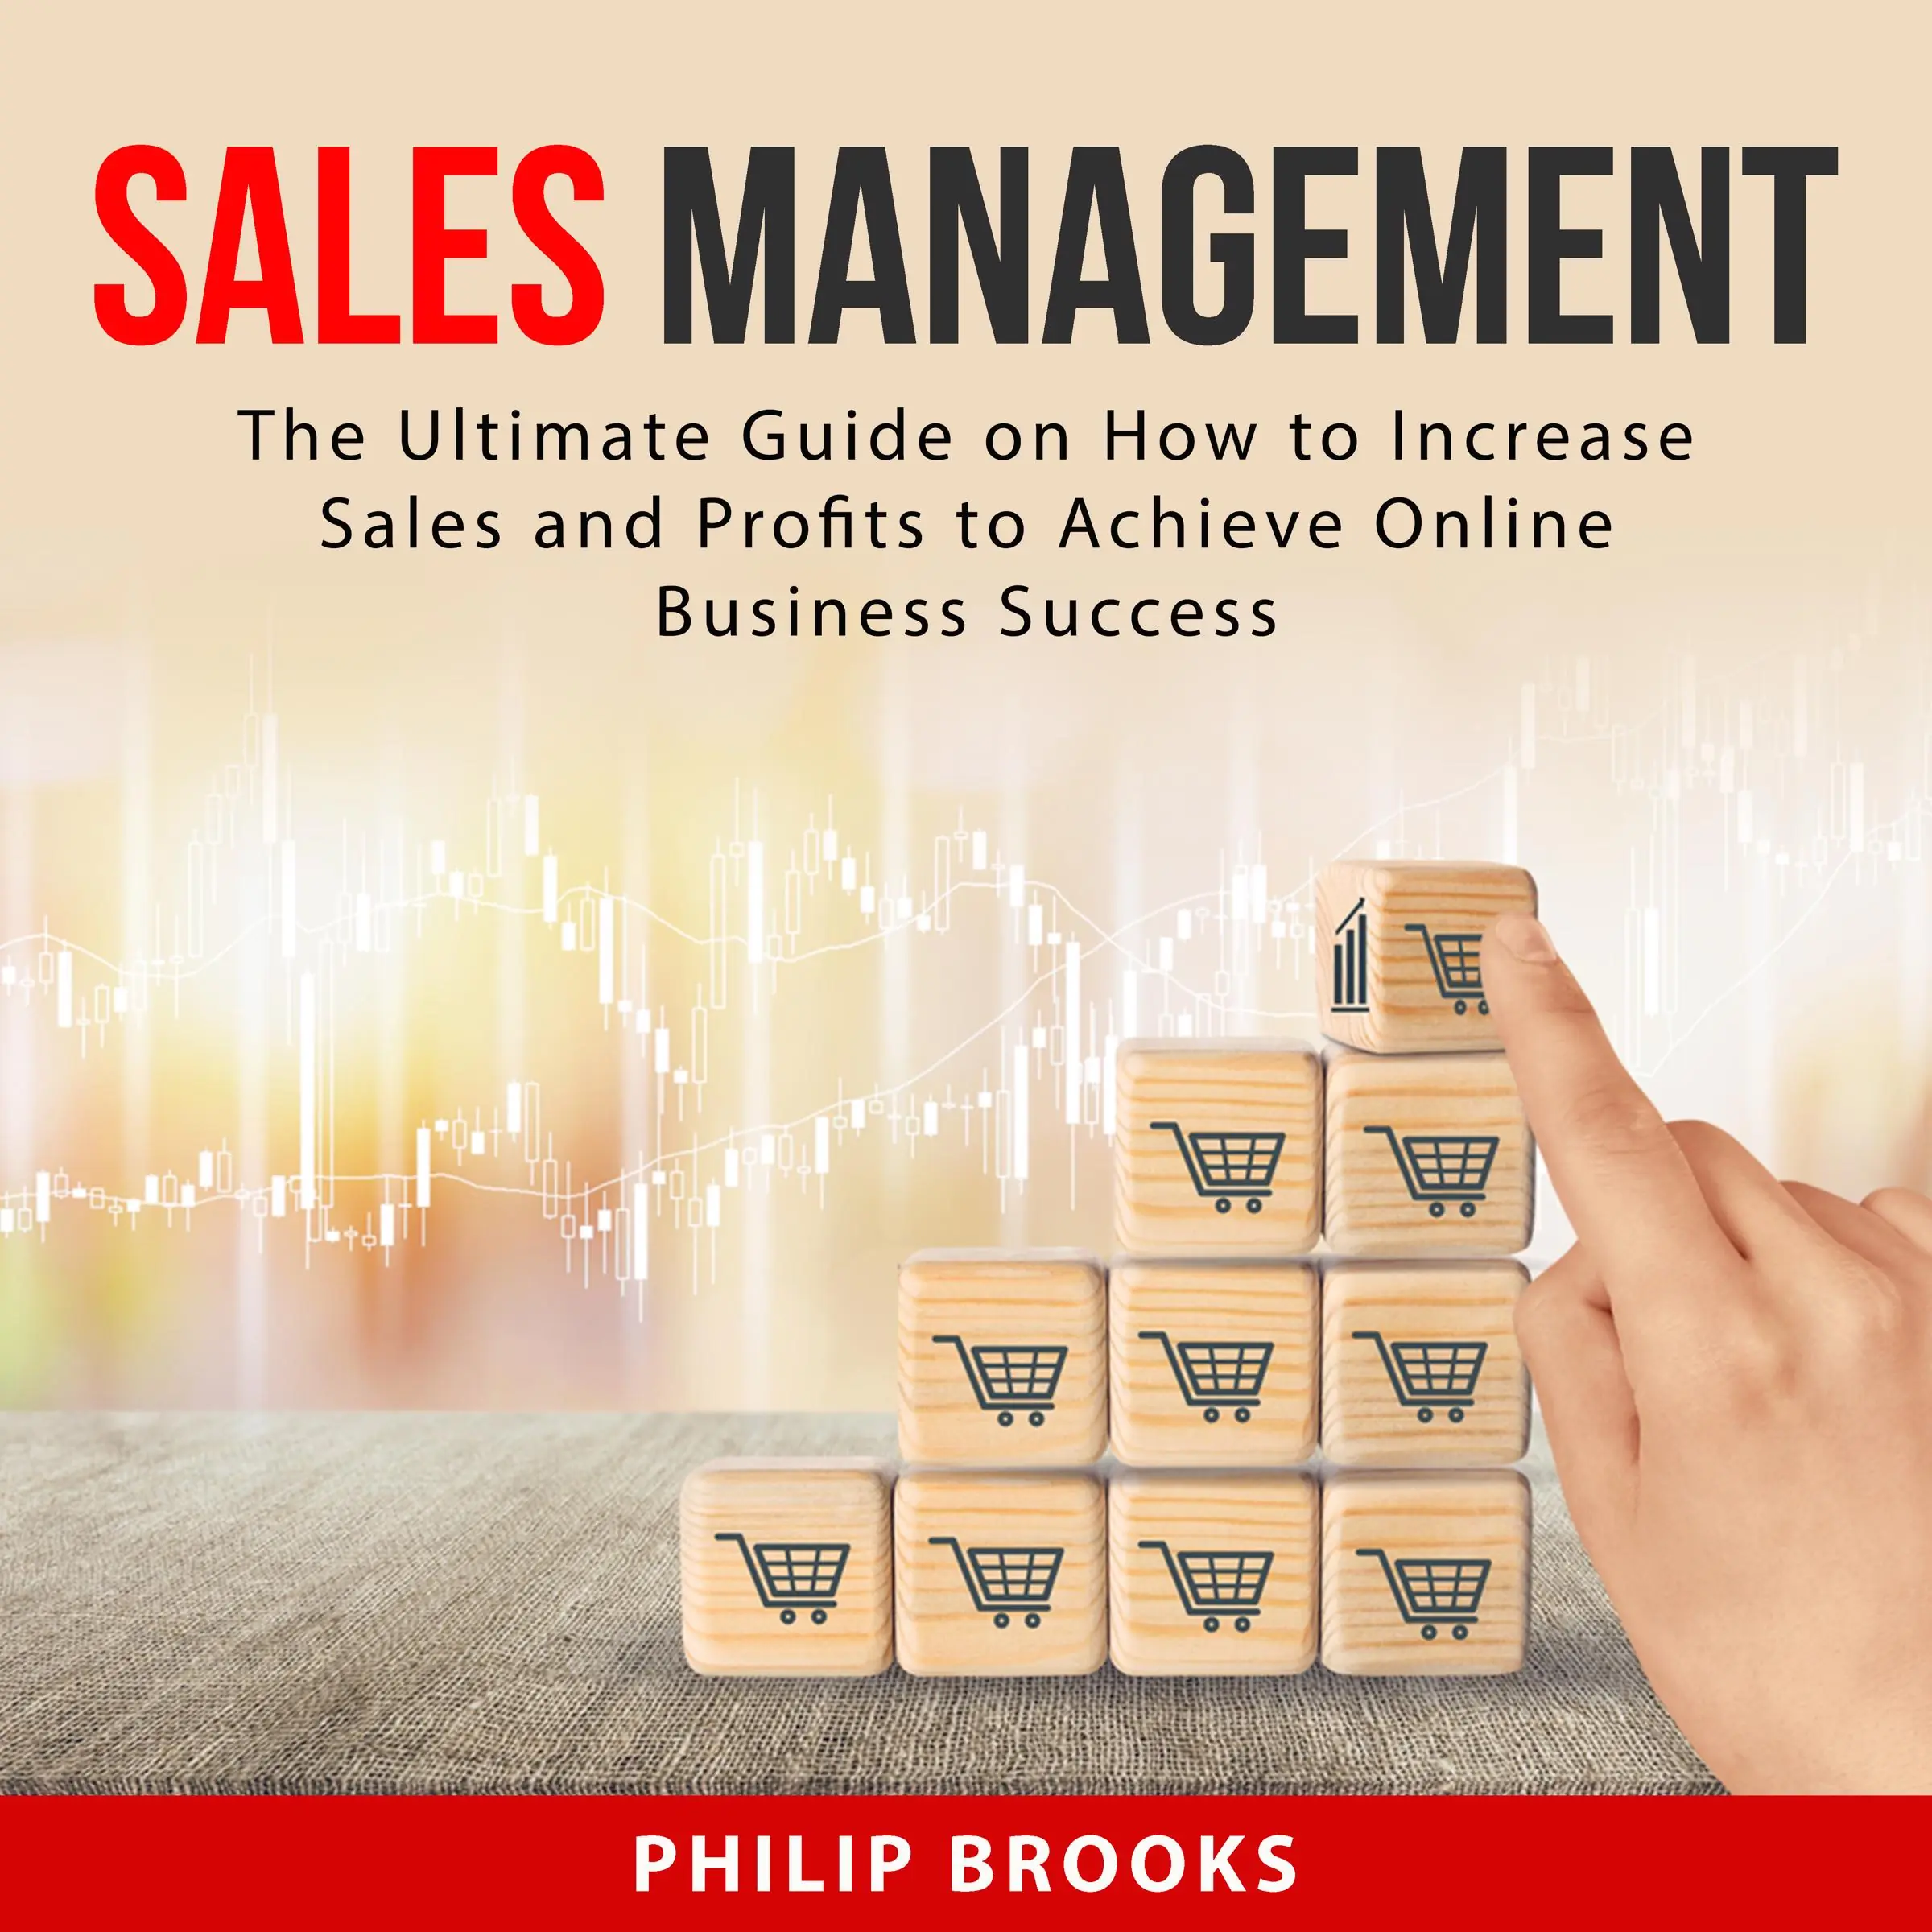 Sales Management: The Ultimate Guide on How to Increase Sales and Profits to Achieve Online Business Success Audiobook by Philip Brooks